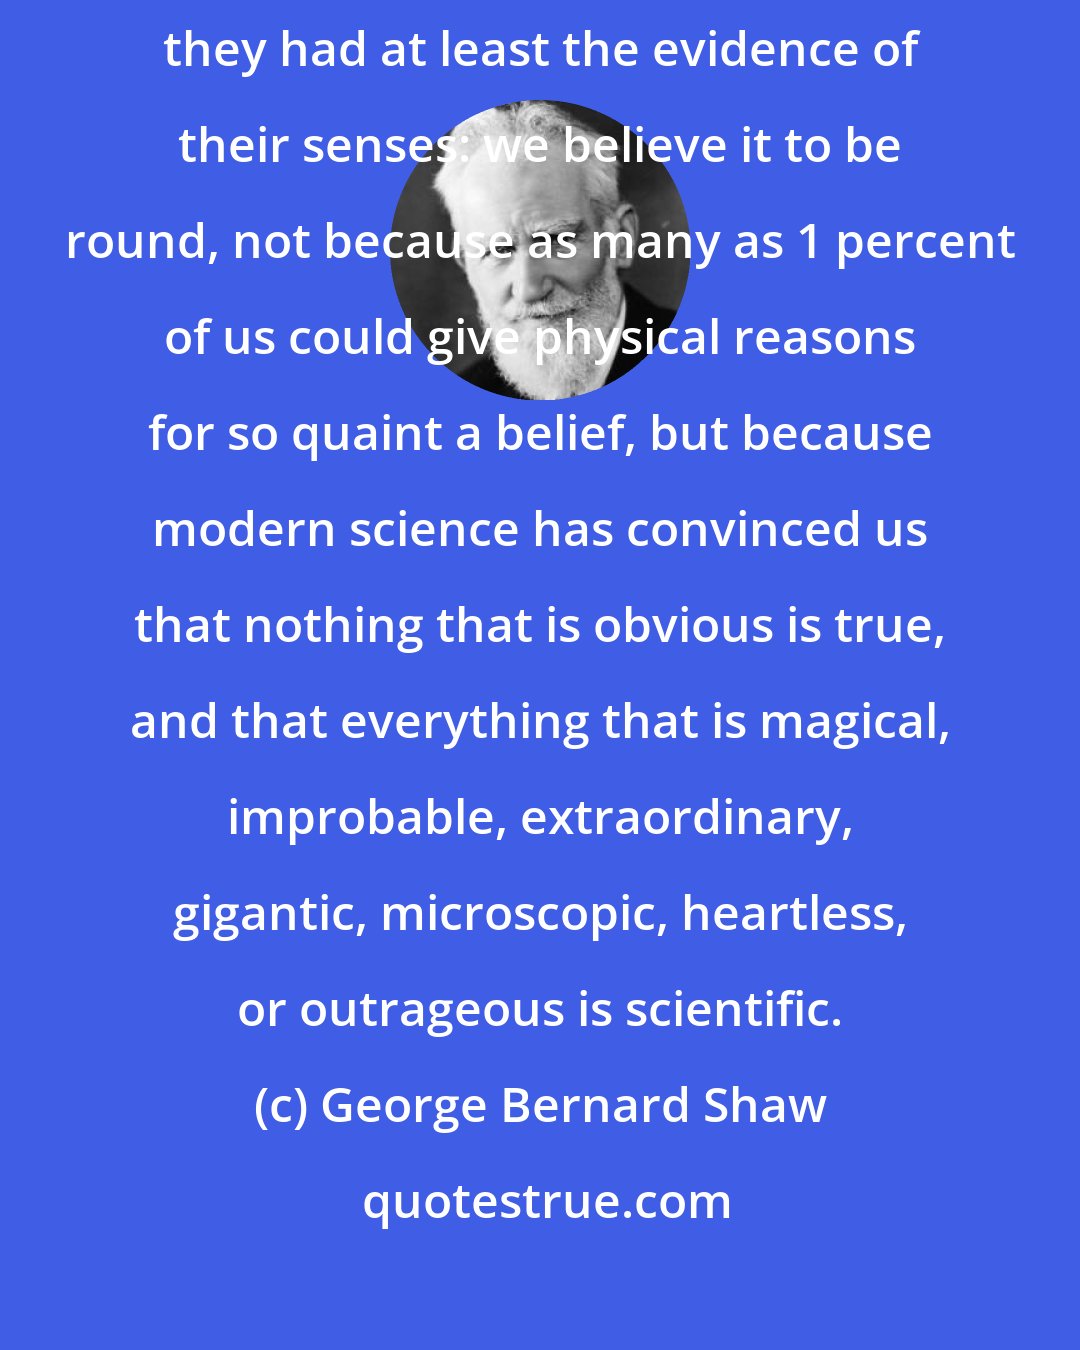 George Bernard Shaw: In the Middle Ages people believed that the earth was flat, for which they had at least the evidence of their senses: we believe it to be round, not because as many as 1 percent of us could give physical reasons for so quaint a belief, but because modern science has convinced us that nothing that is obvious is true, and that everything that is magical, improbable, extraordinary, gigantic, microscopic, heartless, or outrageous is scientific.